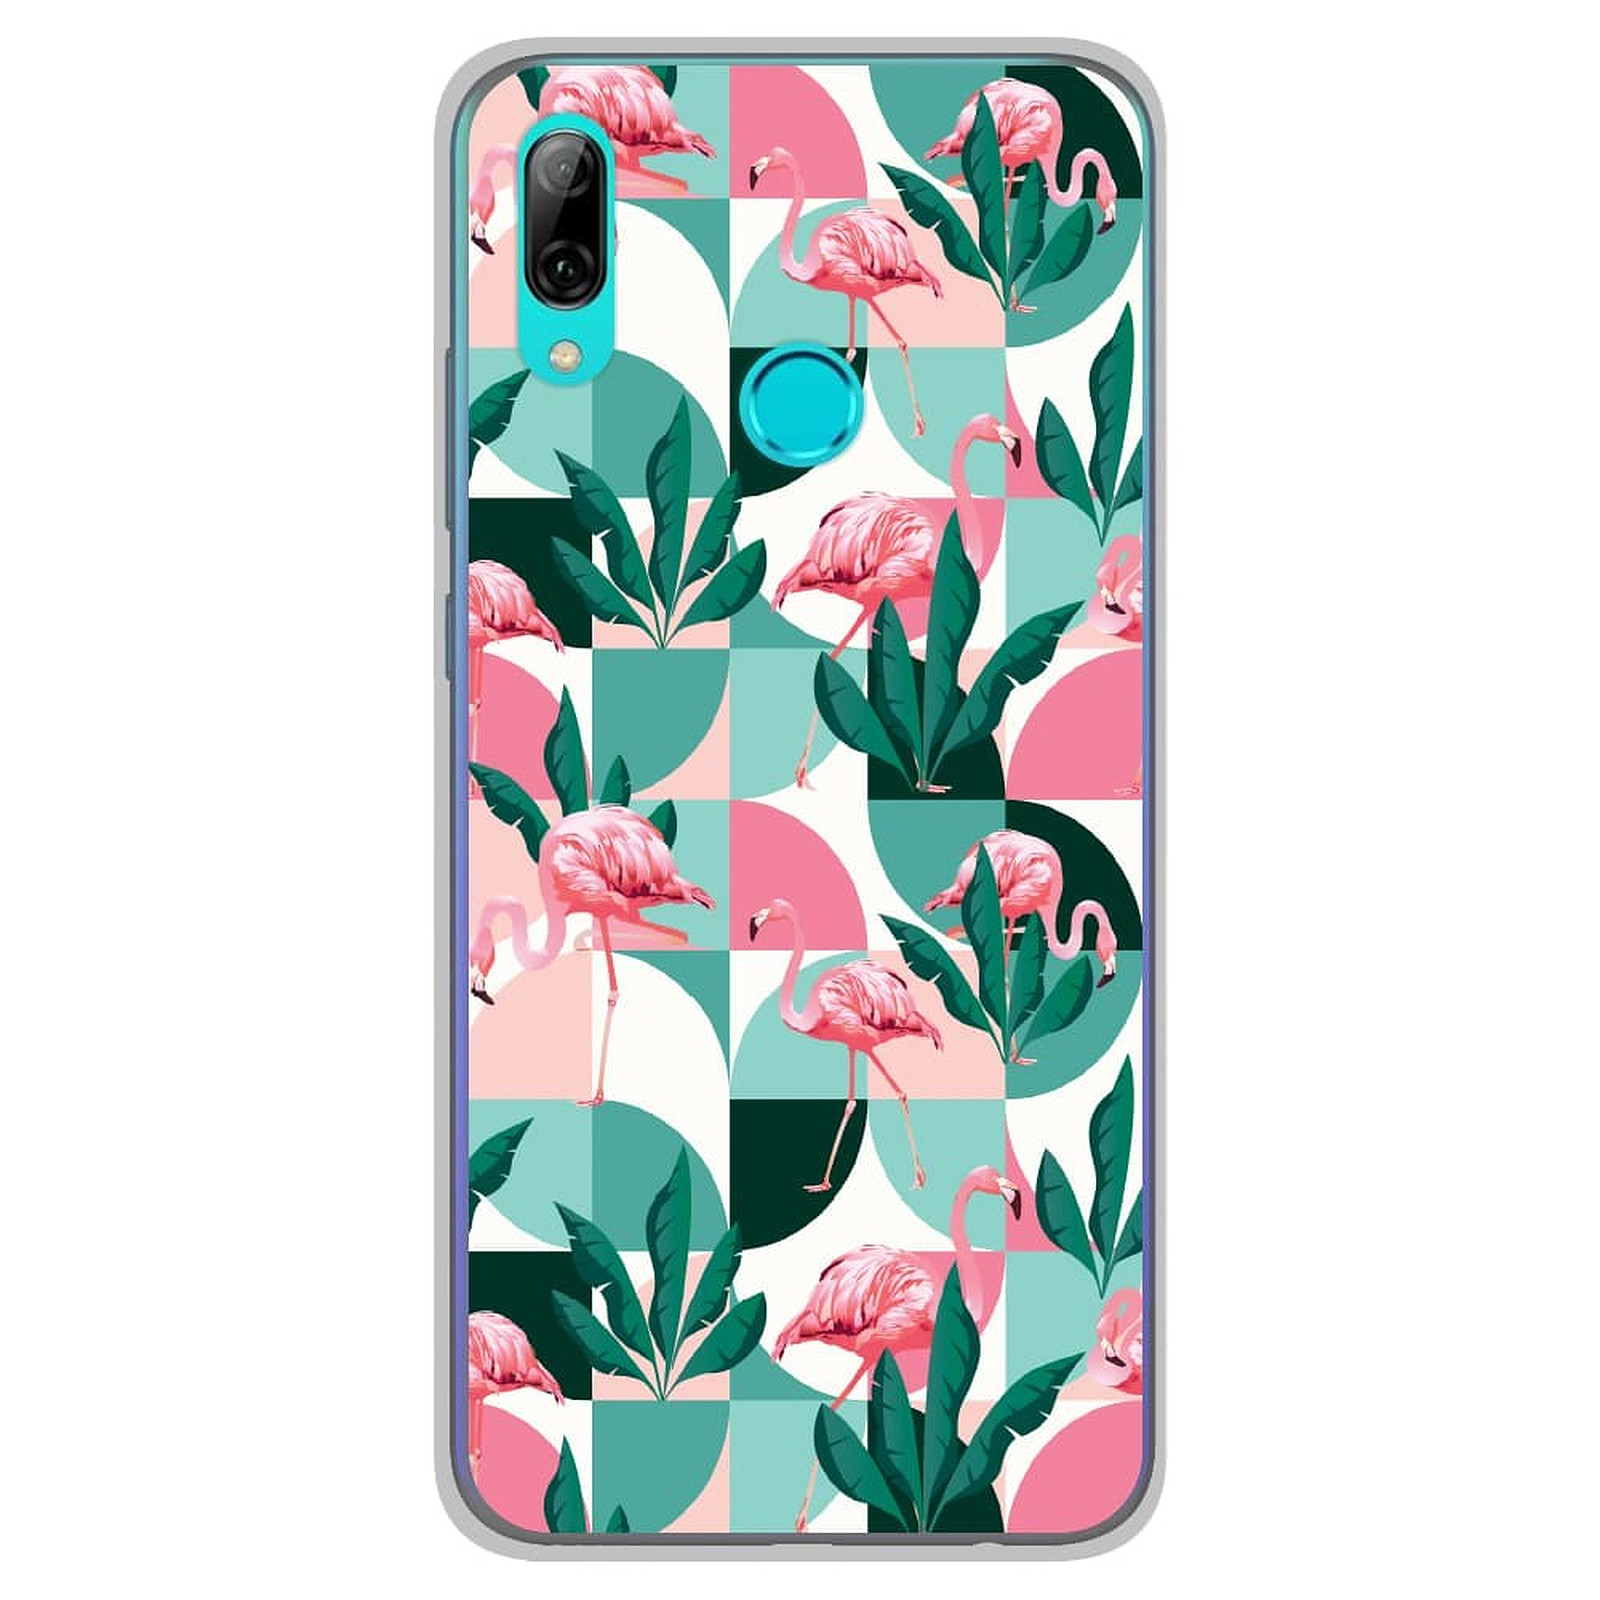 1001 Coques Coque silicone gel Huawei P Smart 2019 motif Flamants Roses ge´ome´trique - Coque telephone 1001Coques